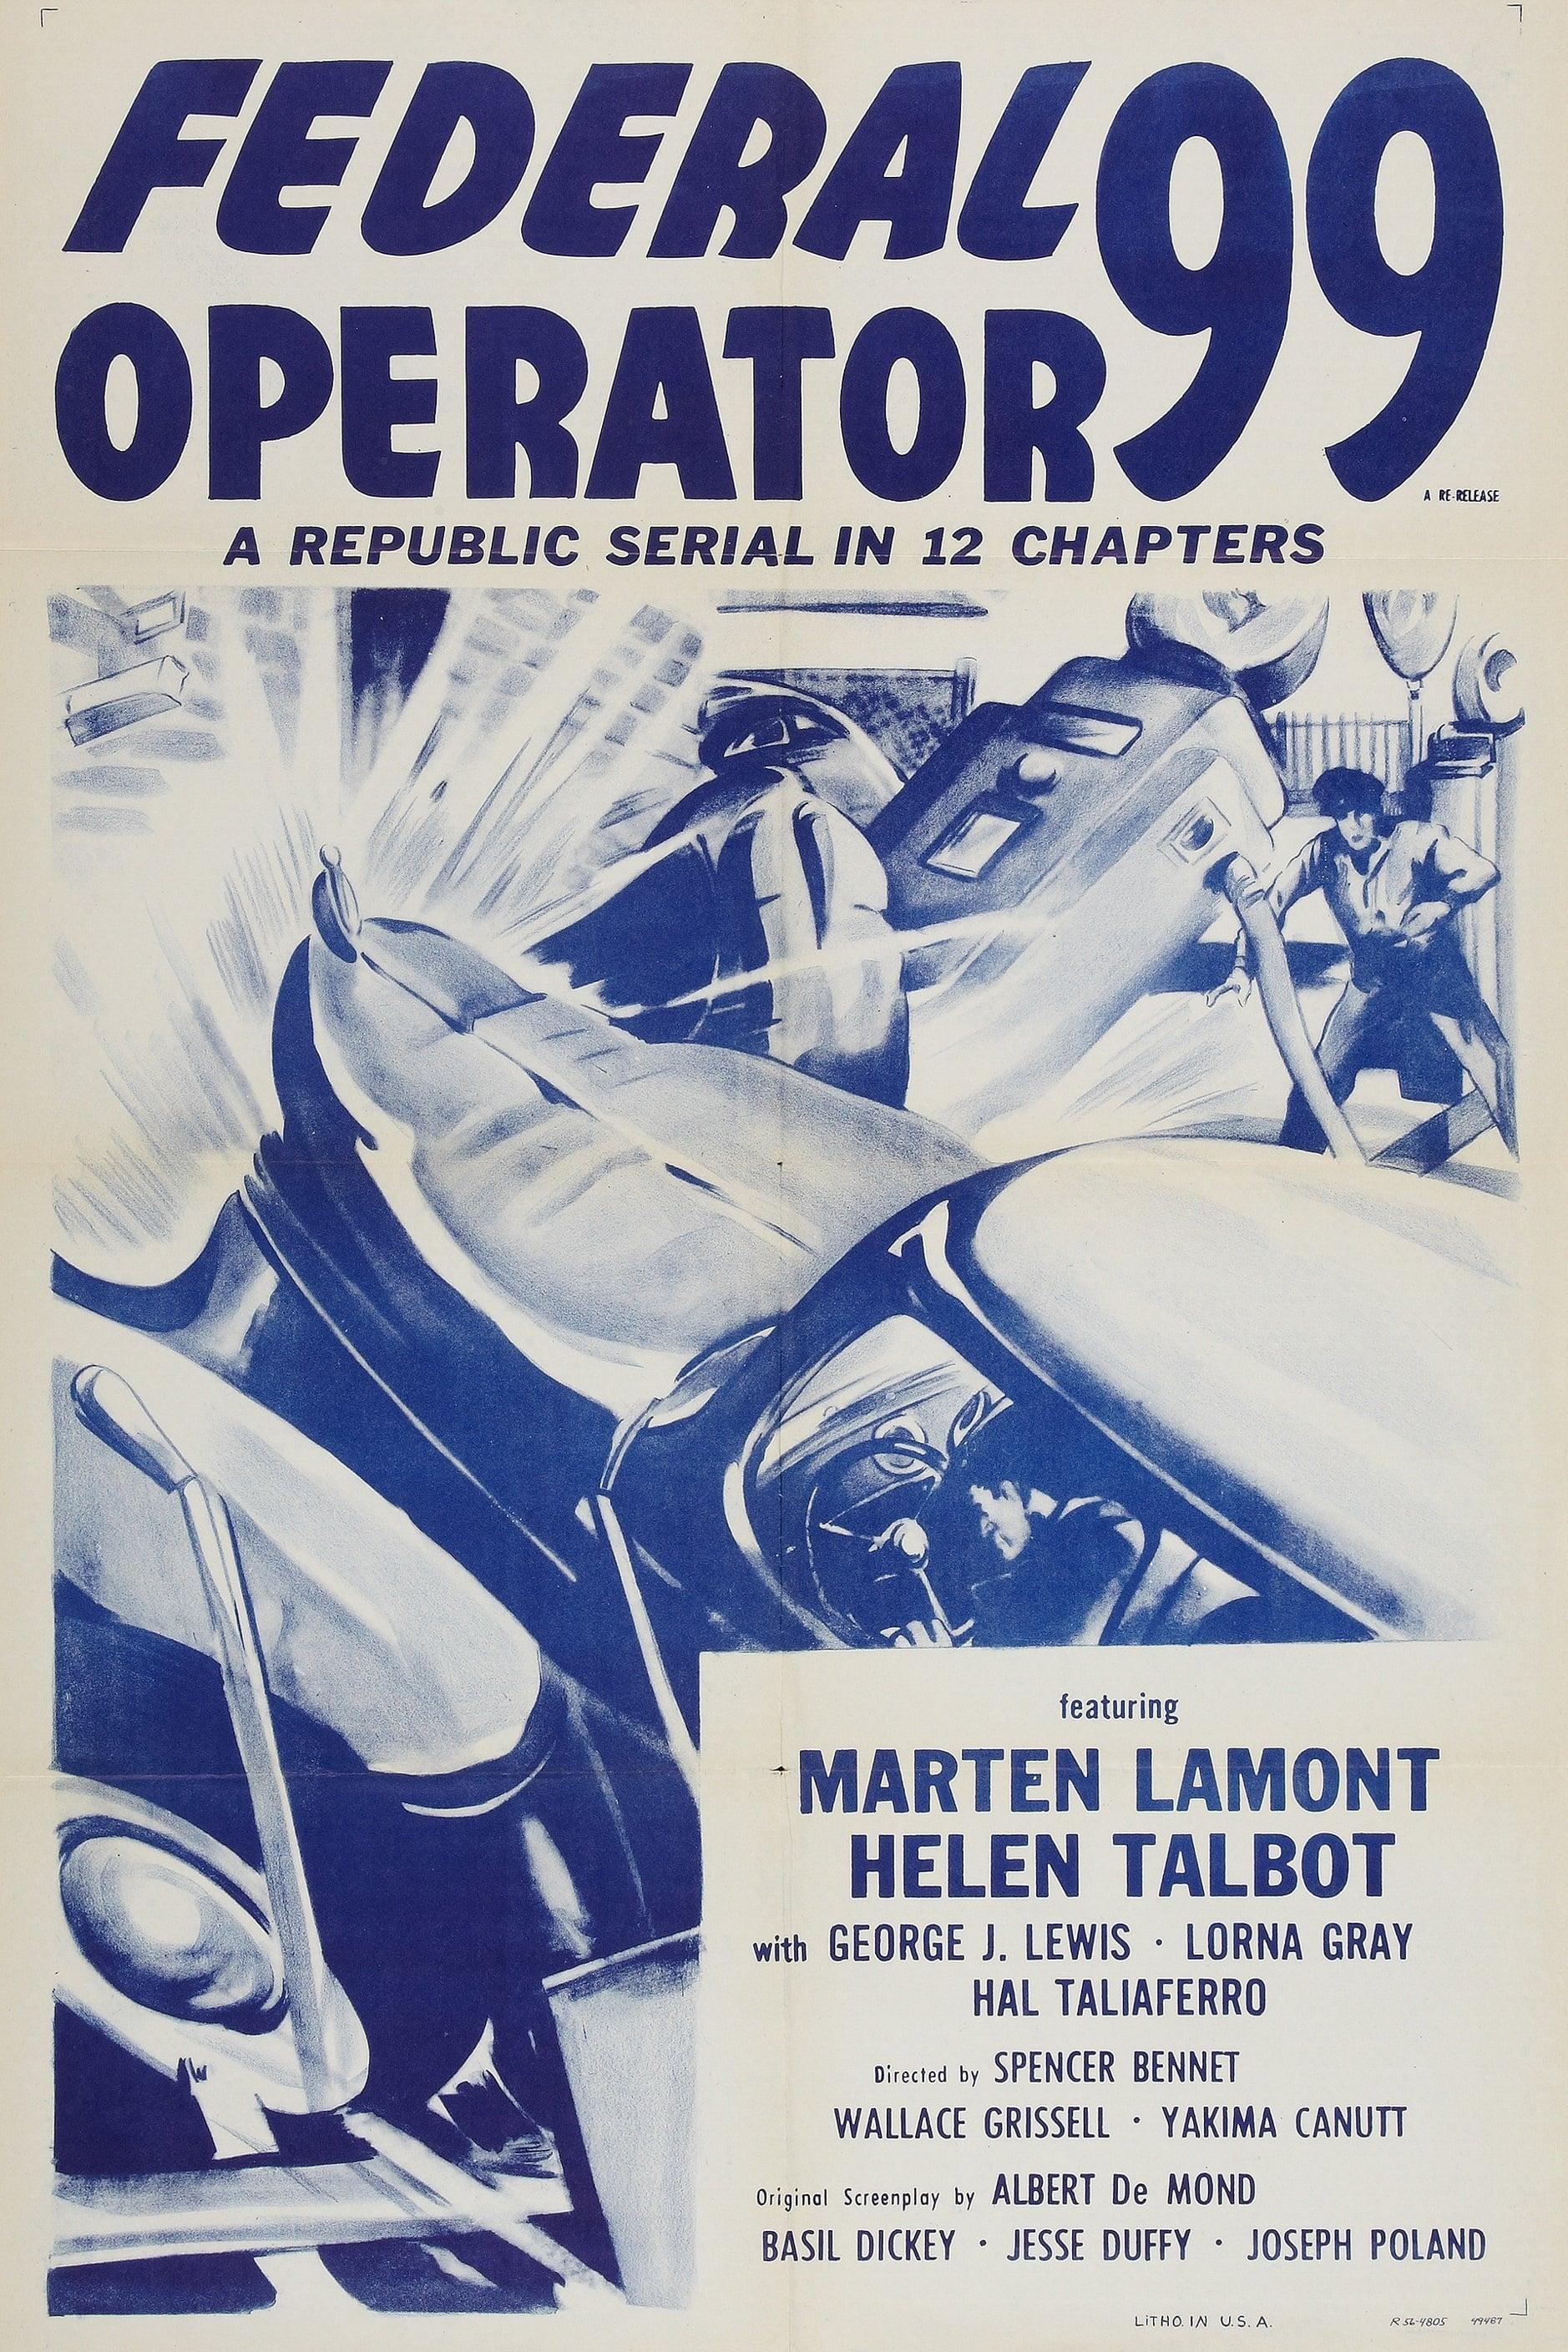 Federal Operator 99 poster